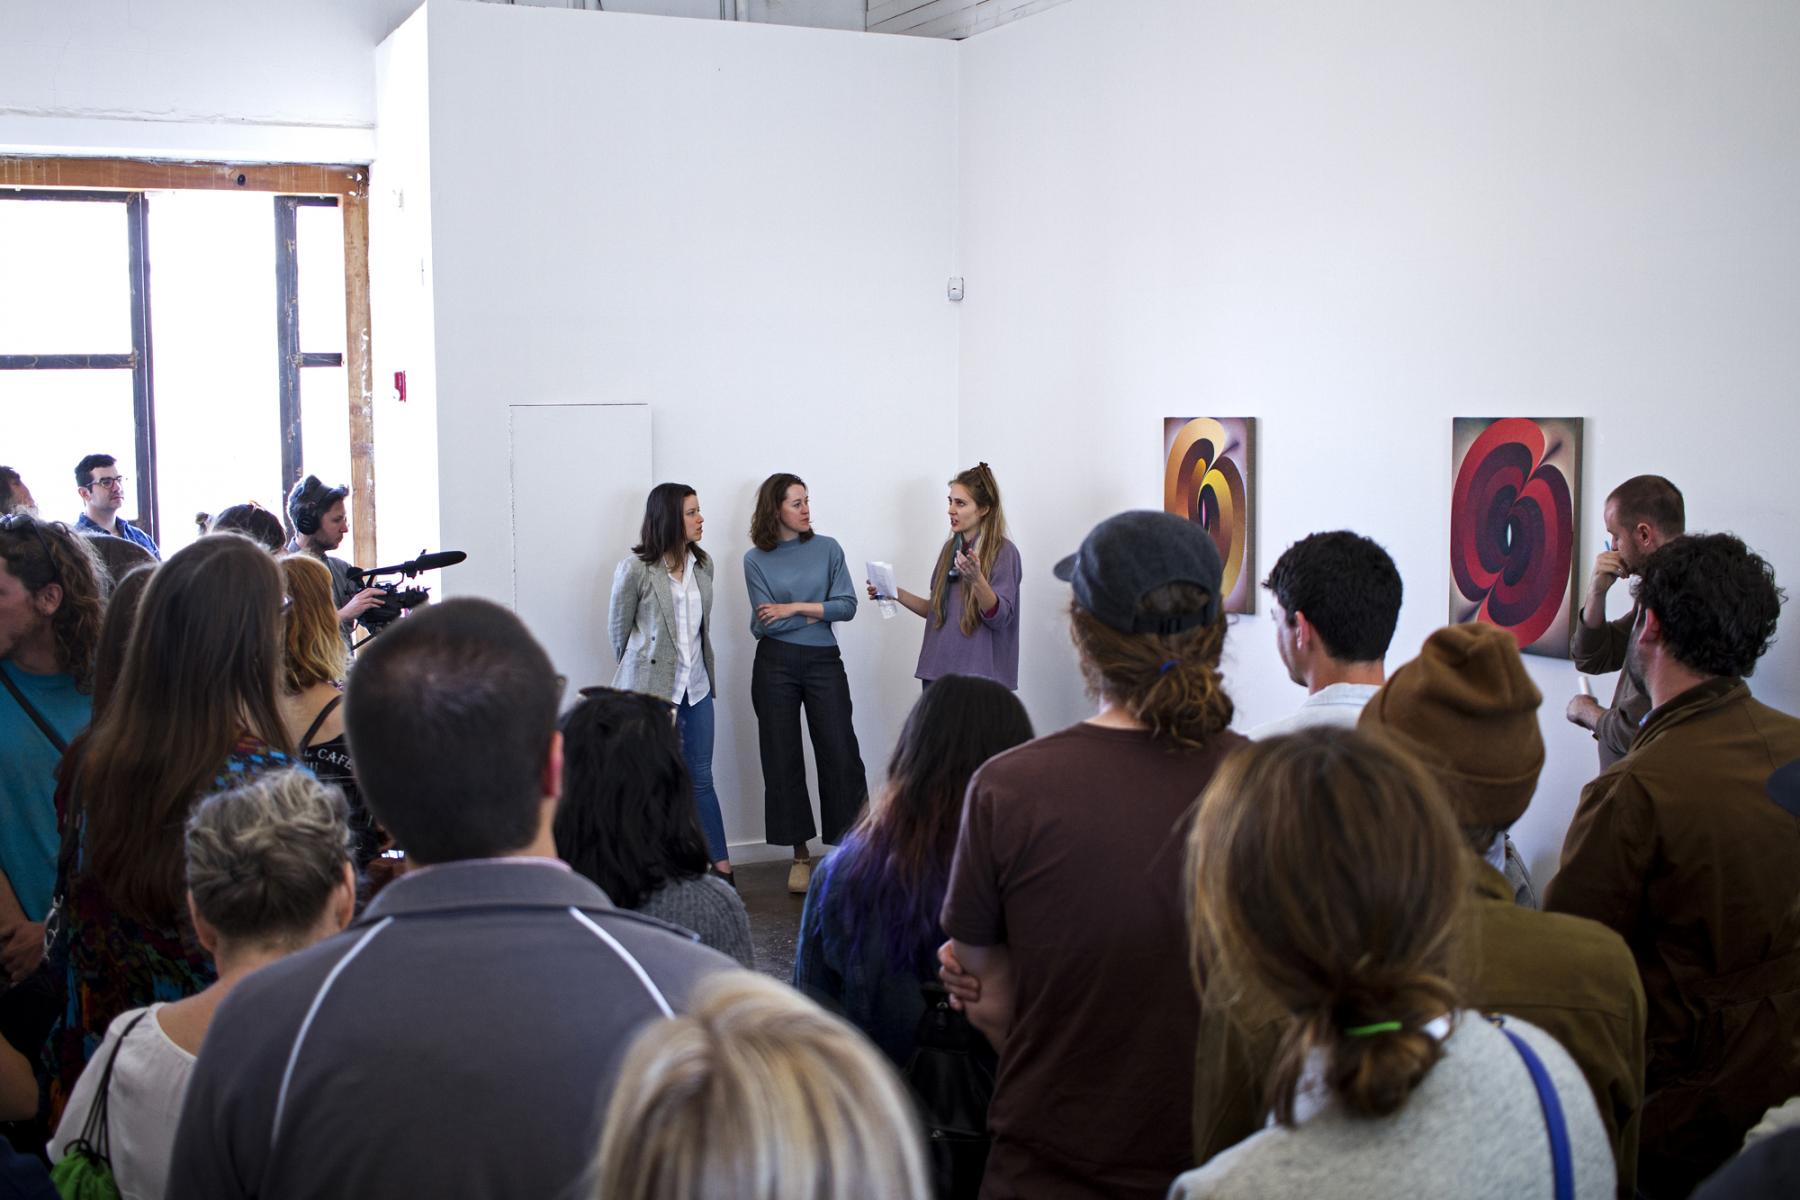 Loie Hollowell speaking at the artist walkthrough for After Effect, March 12, 2016. Photo by Luis Nieto Dickens.